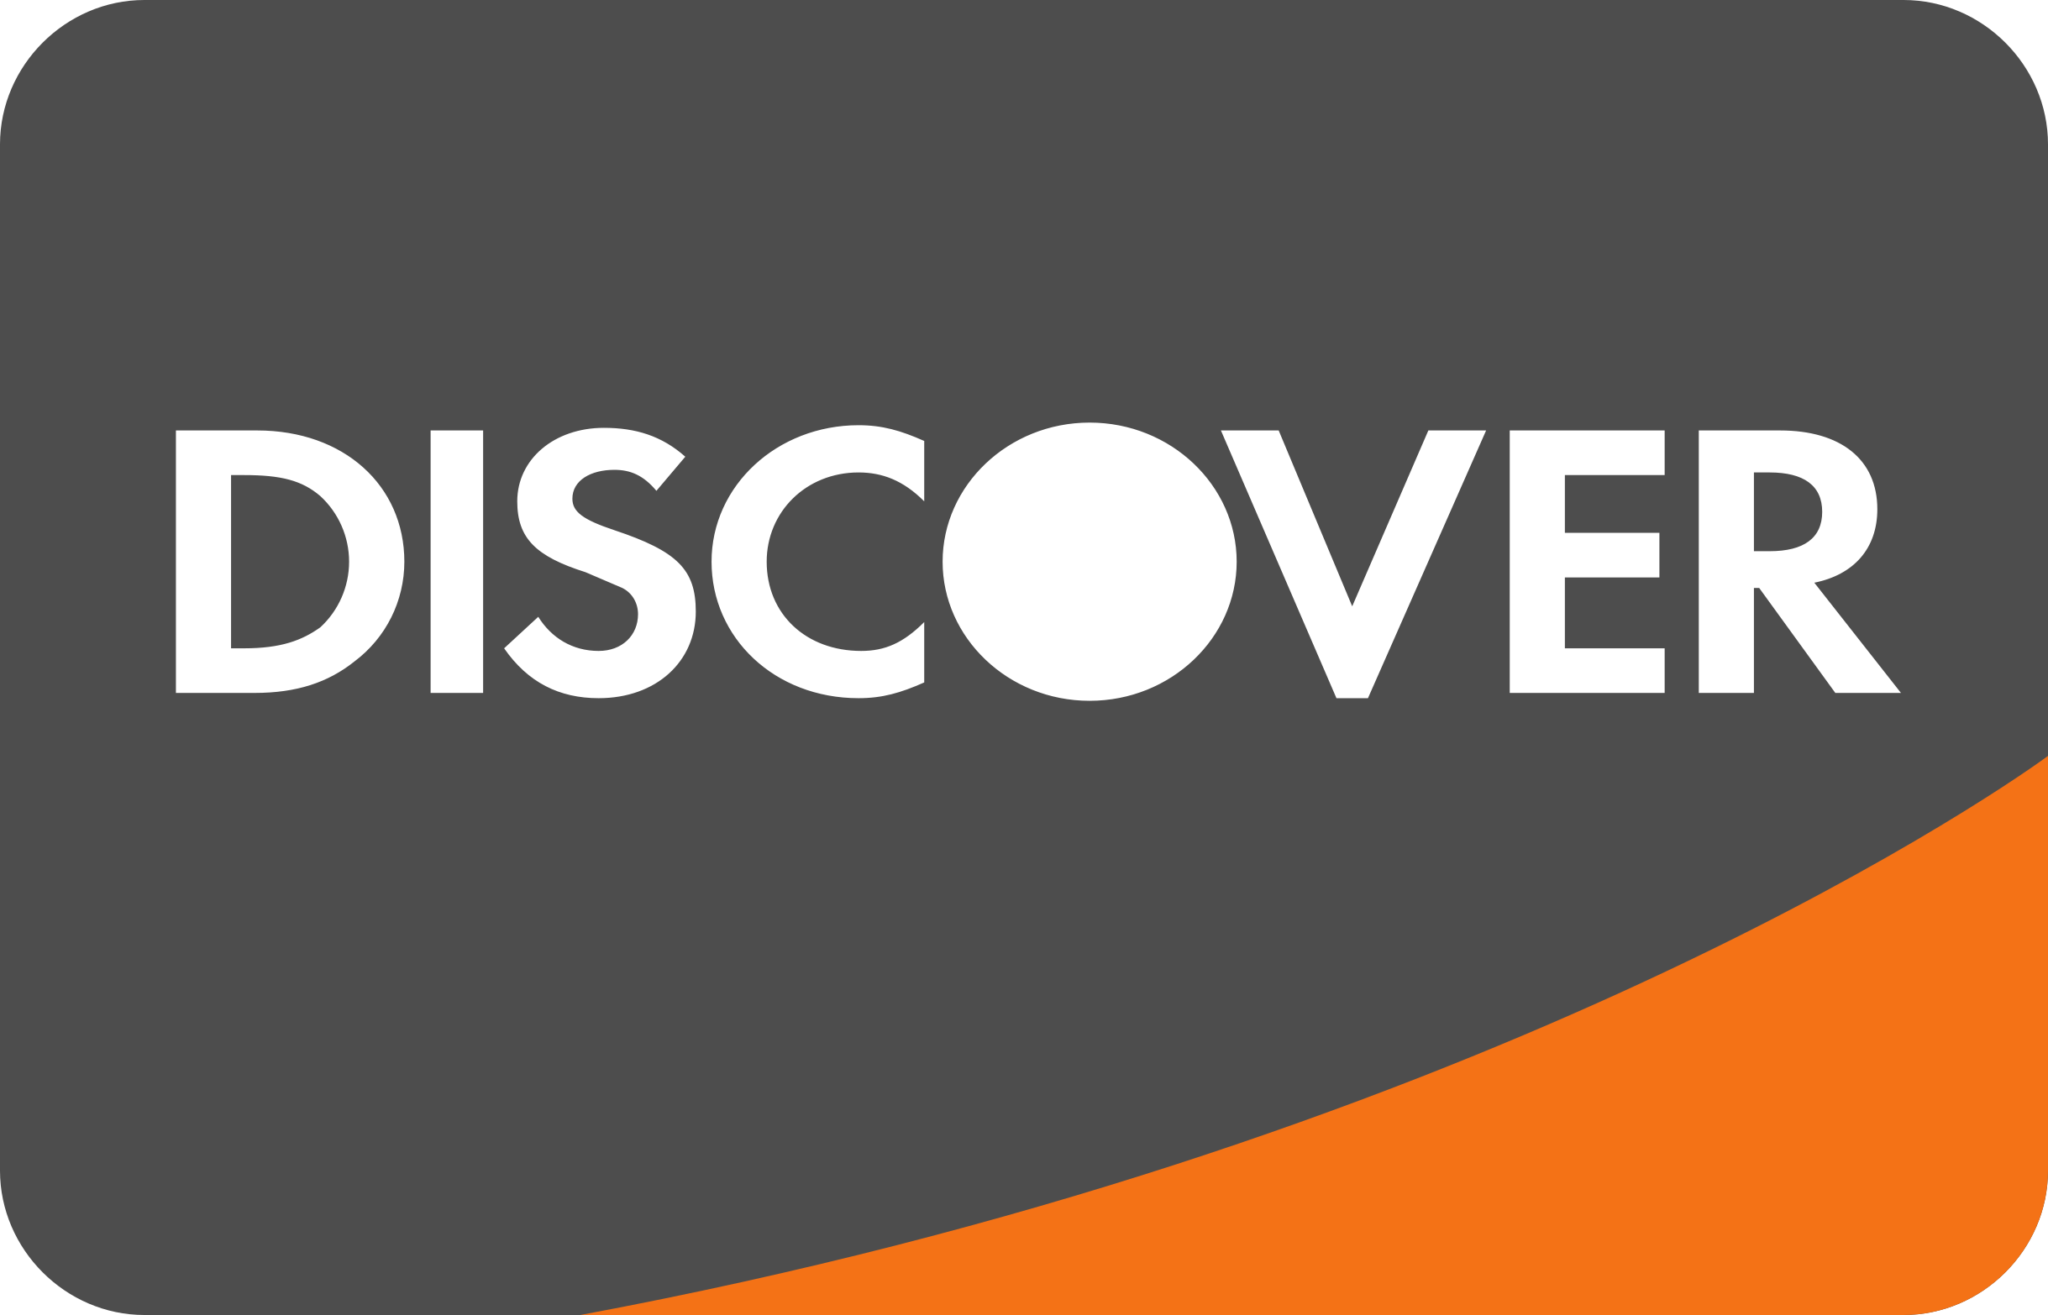 Discover лого. Discover иконка. Discover Card логотип. Discovery карточки. Discover and see